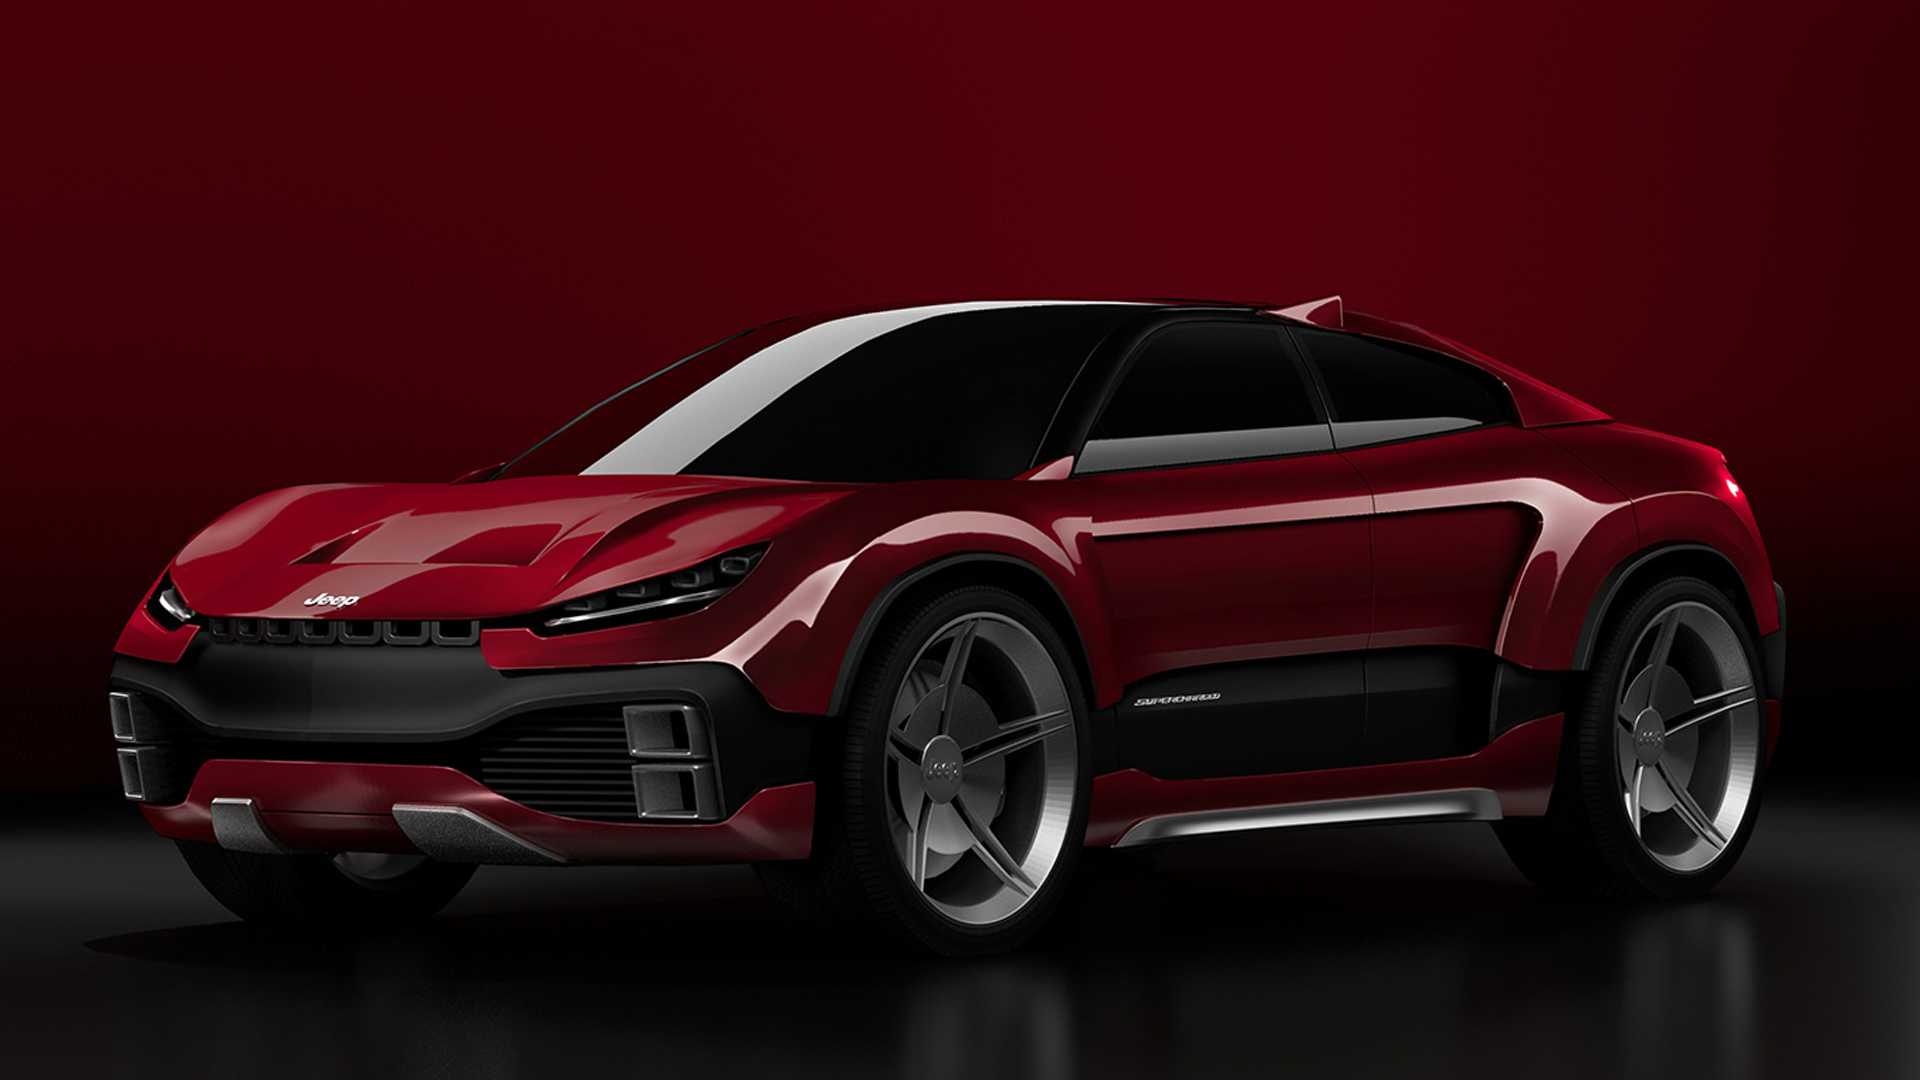 Jeep Trackhawk Coupe - Rendering